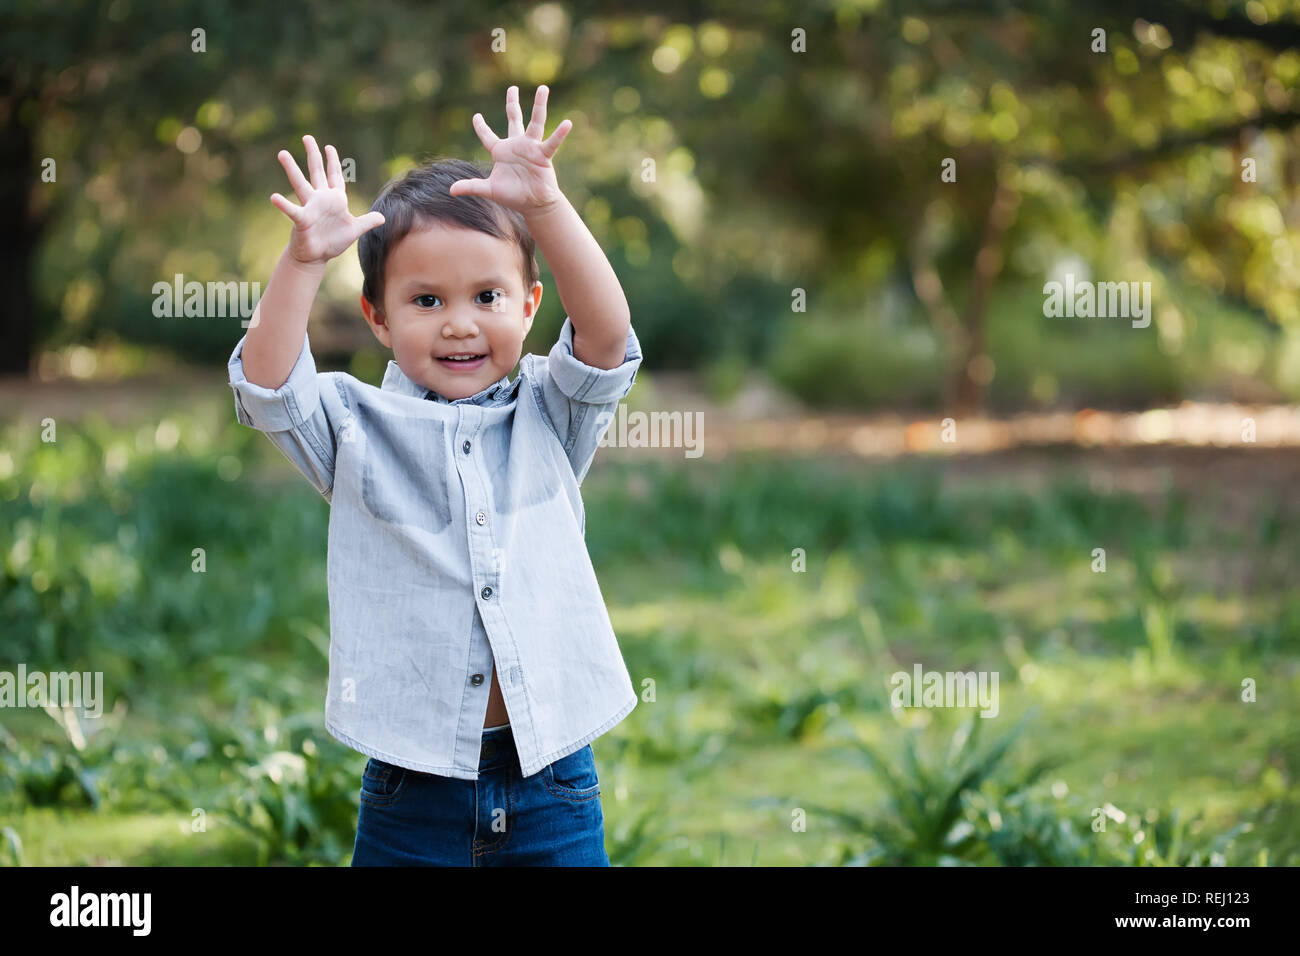 Young toddler boy using his hands to express himself, standing outdoors in a green field looking happy. Stock Photo